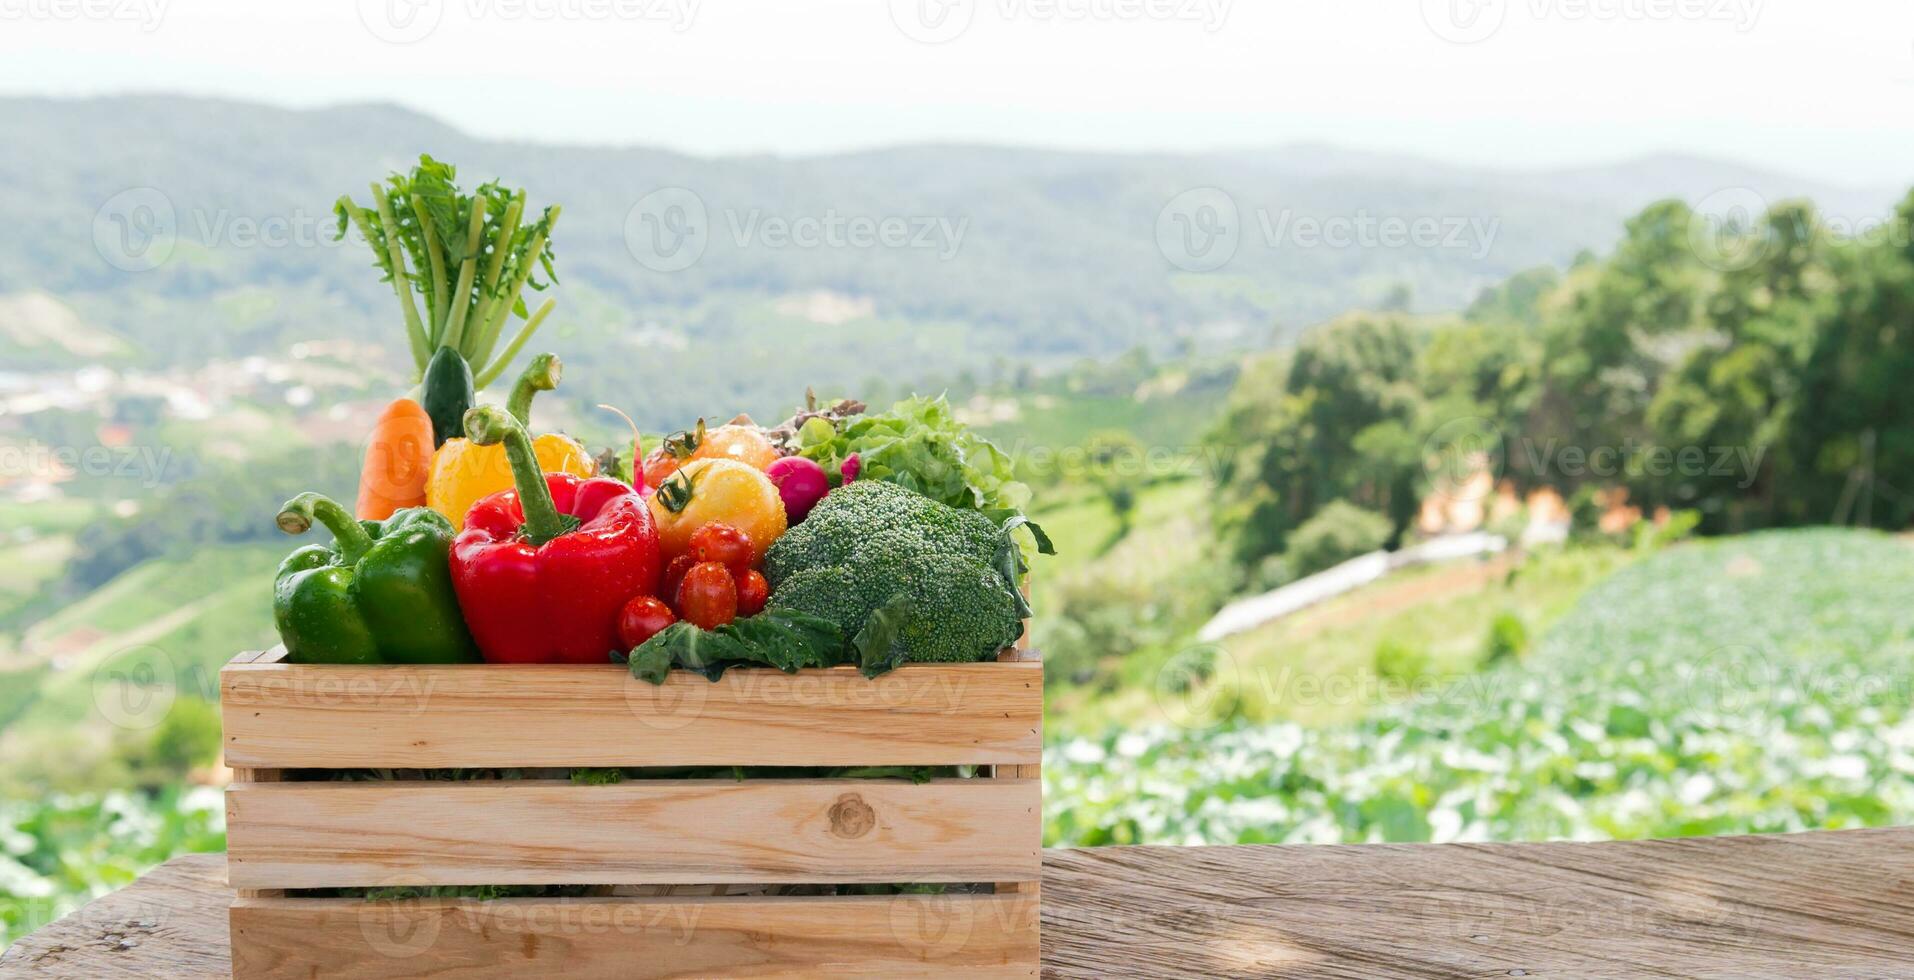 Wooden crate filled with fresh organic vegetables photo